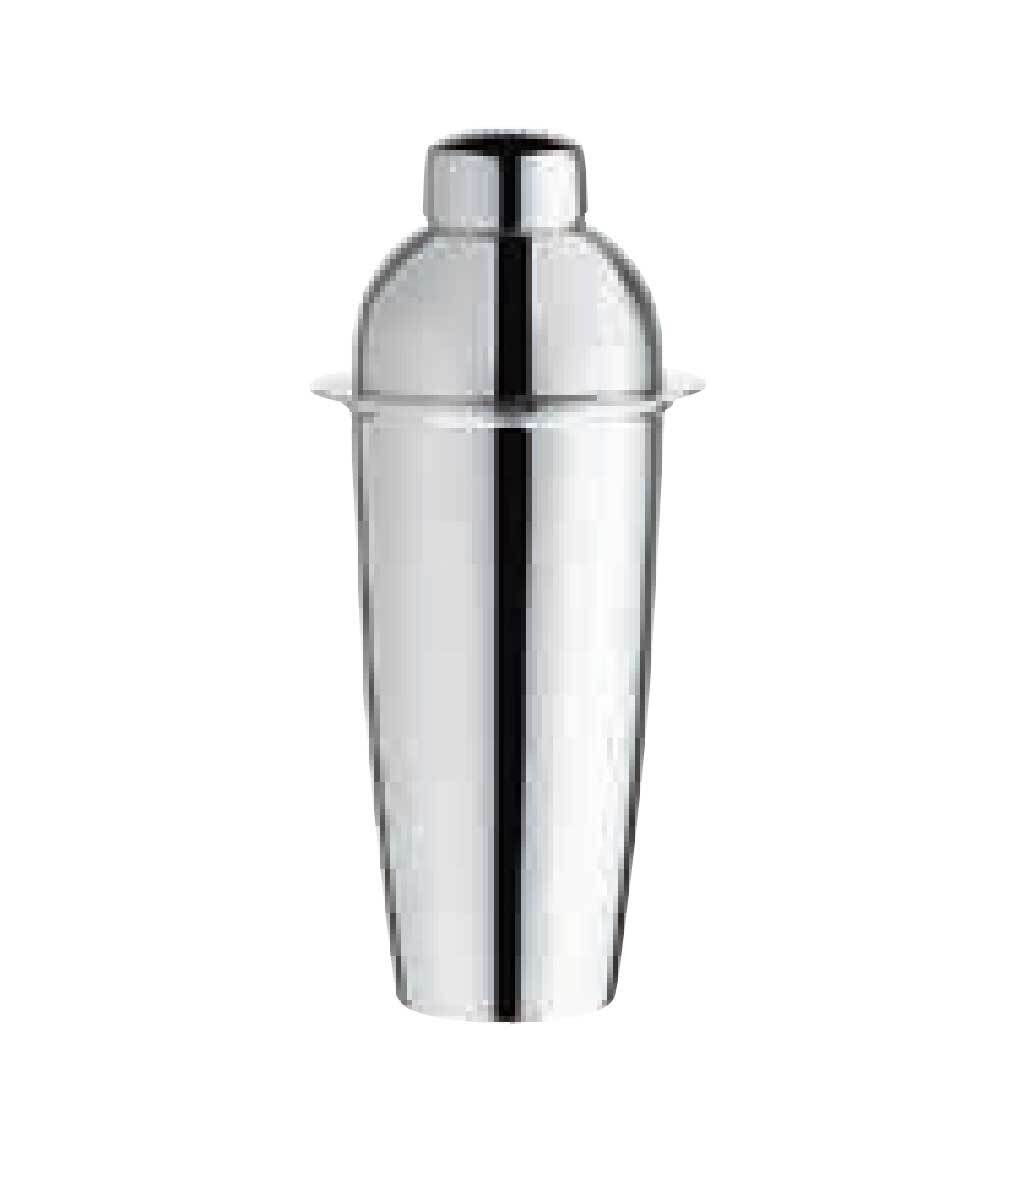 Ercuis Saturne Cocktail Shaker 9 Inch Silver Plated F544150-08